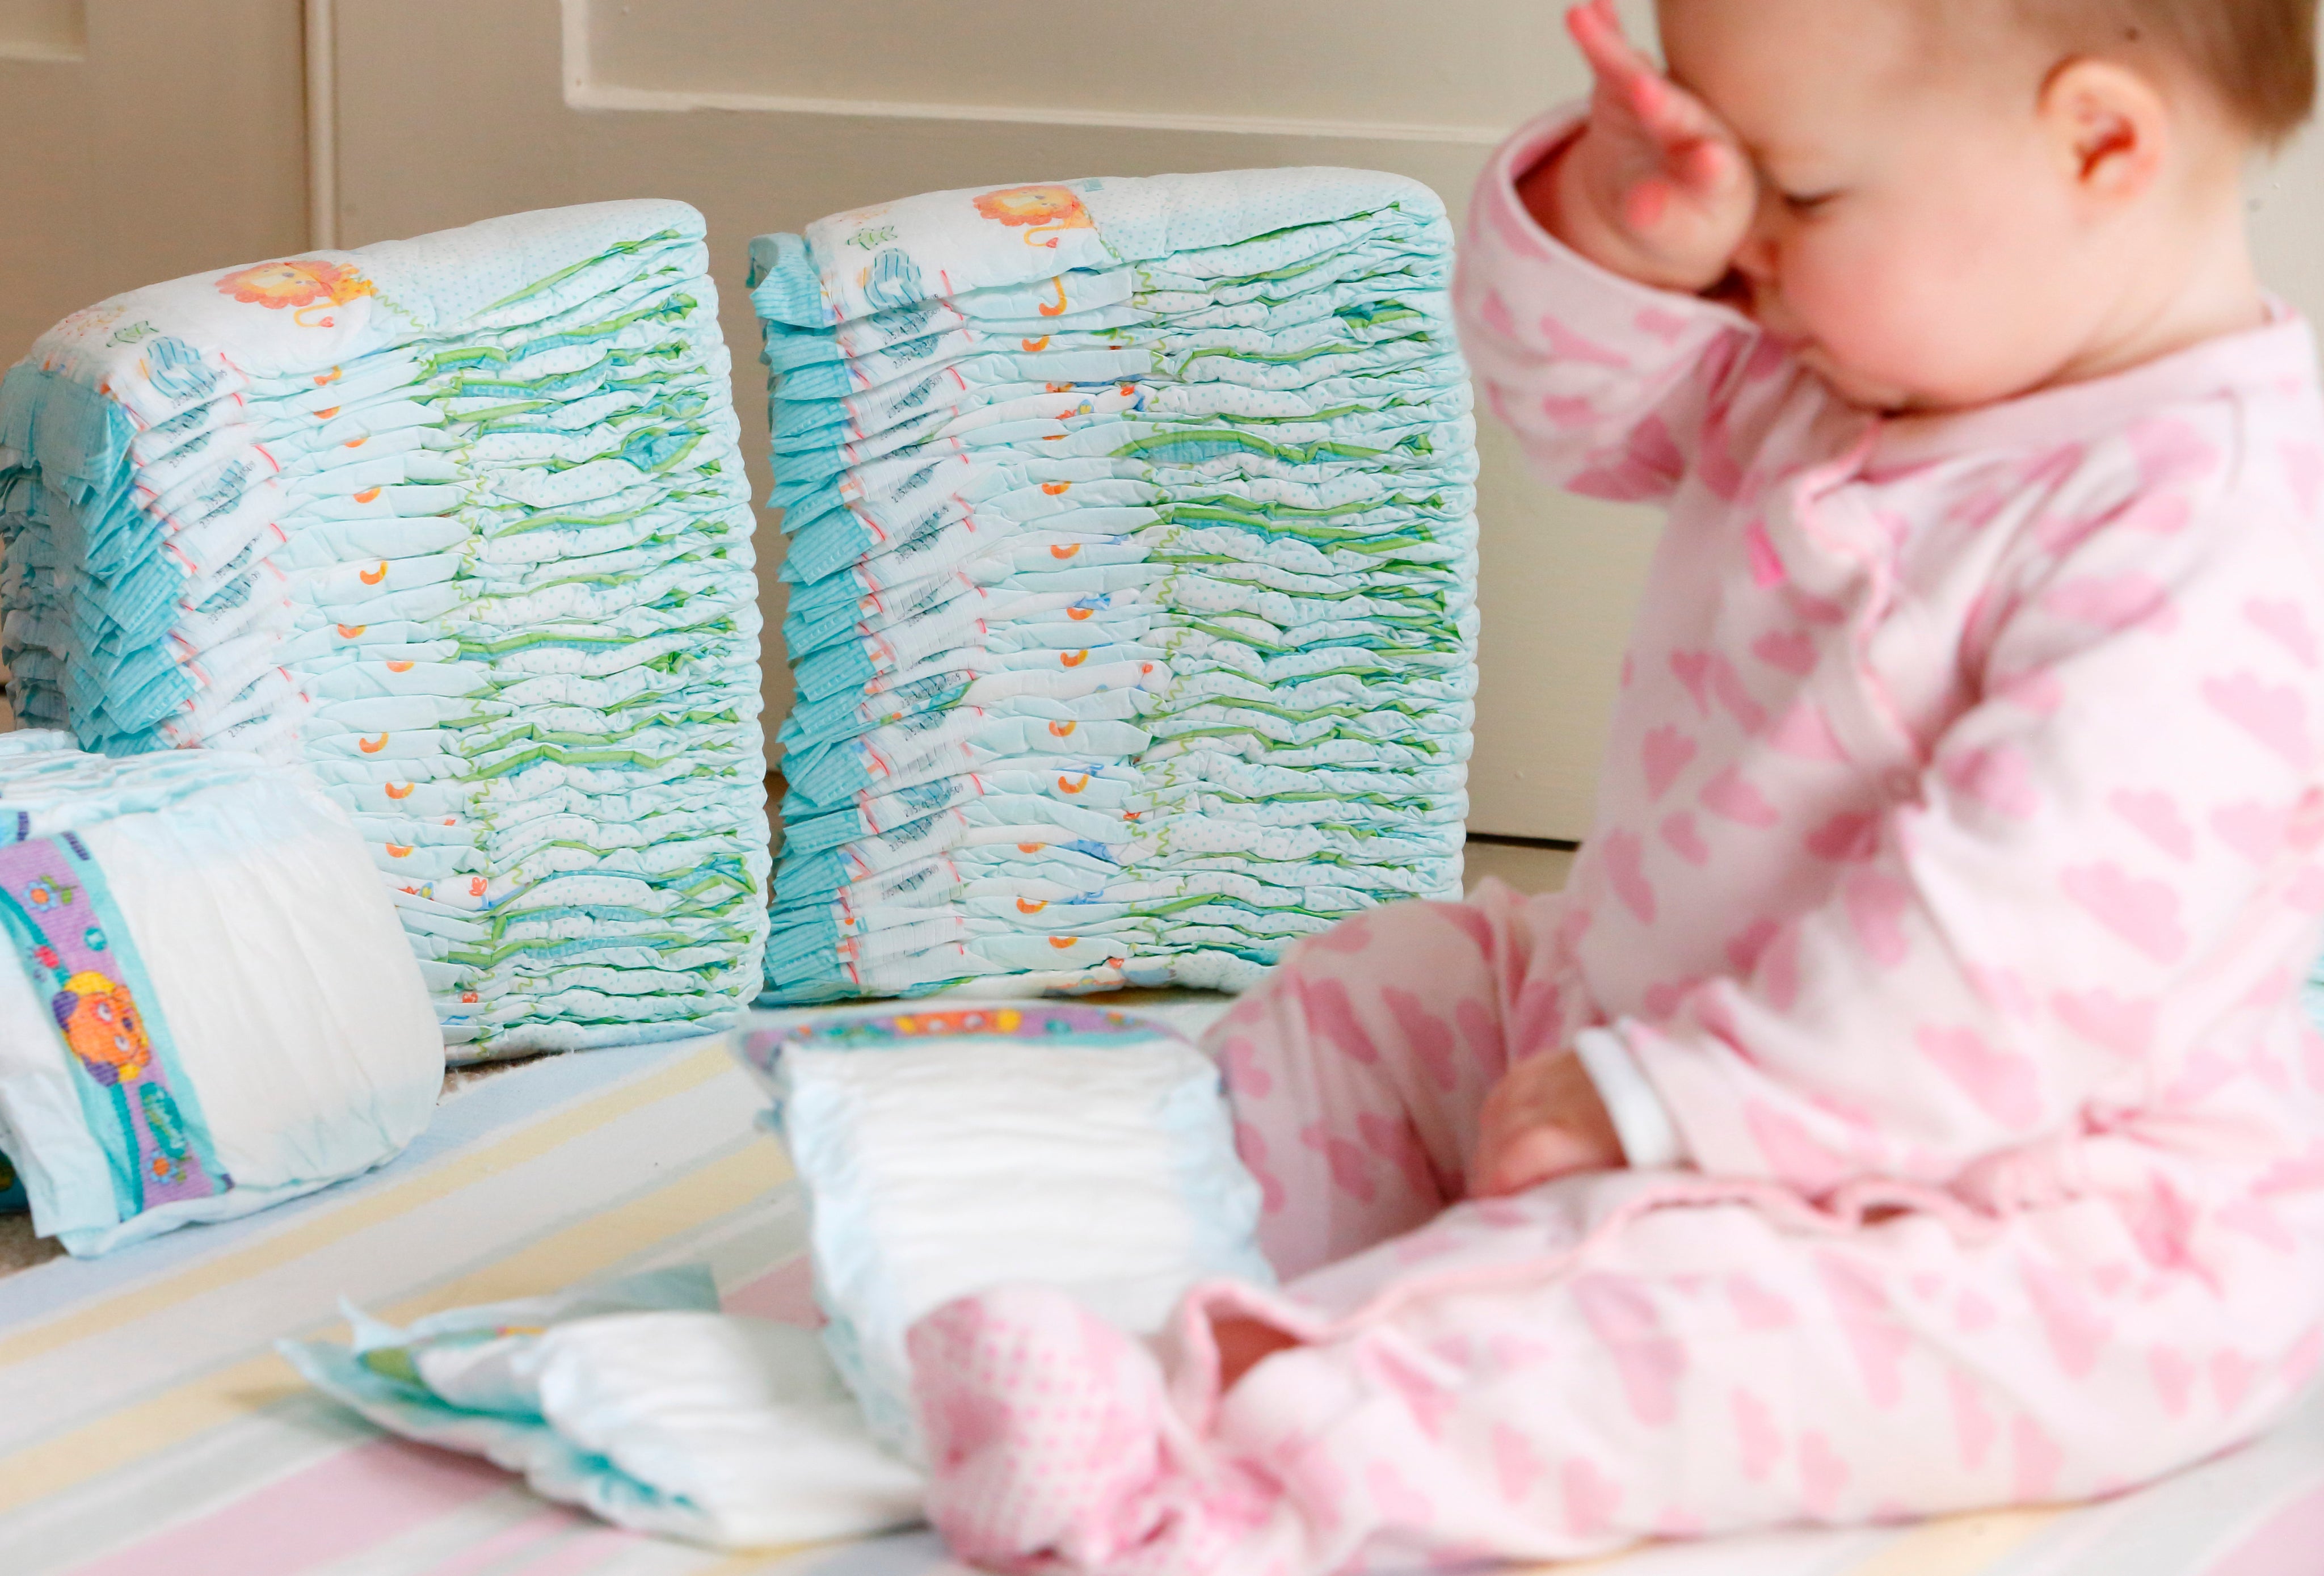 An estimated 143 million nappies are thrown away in Wales each year